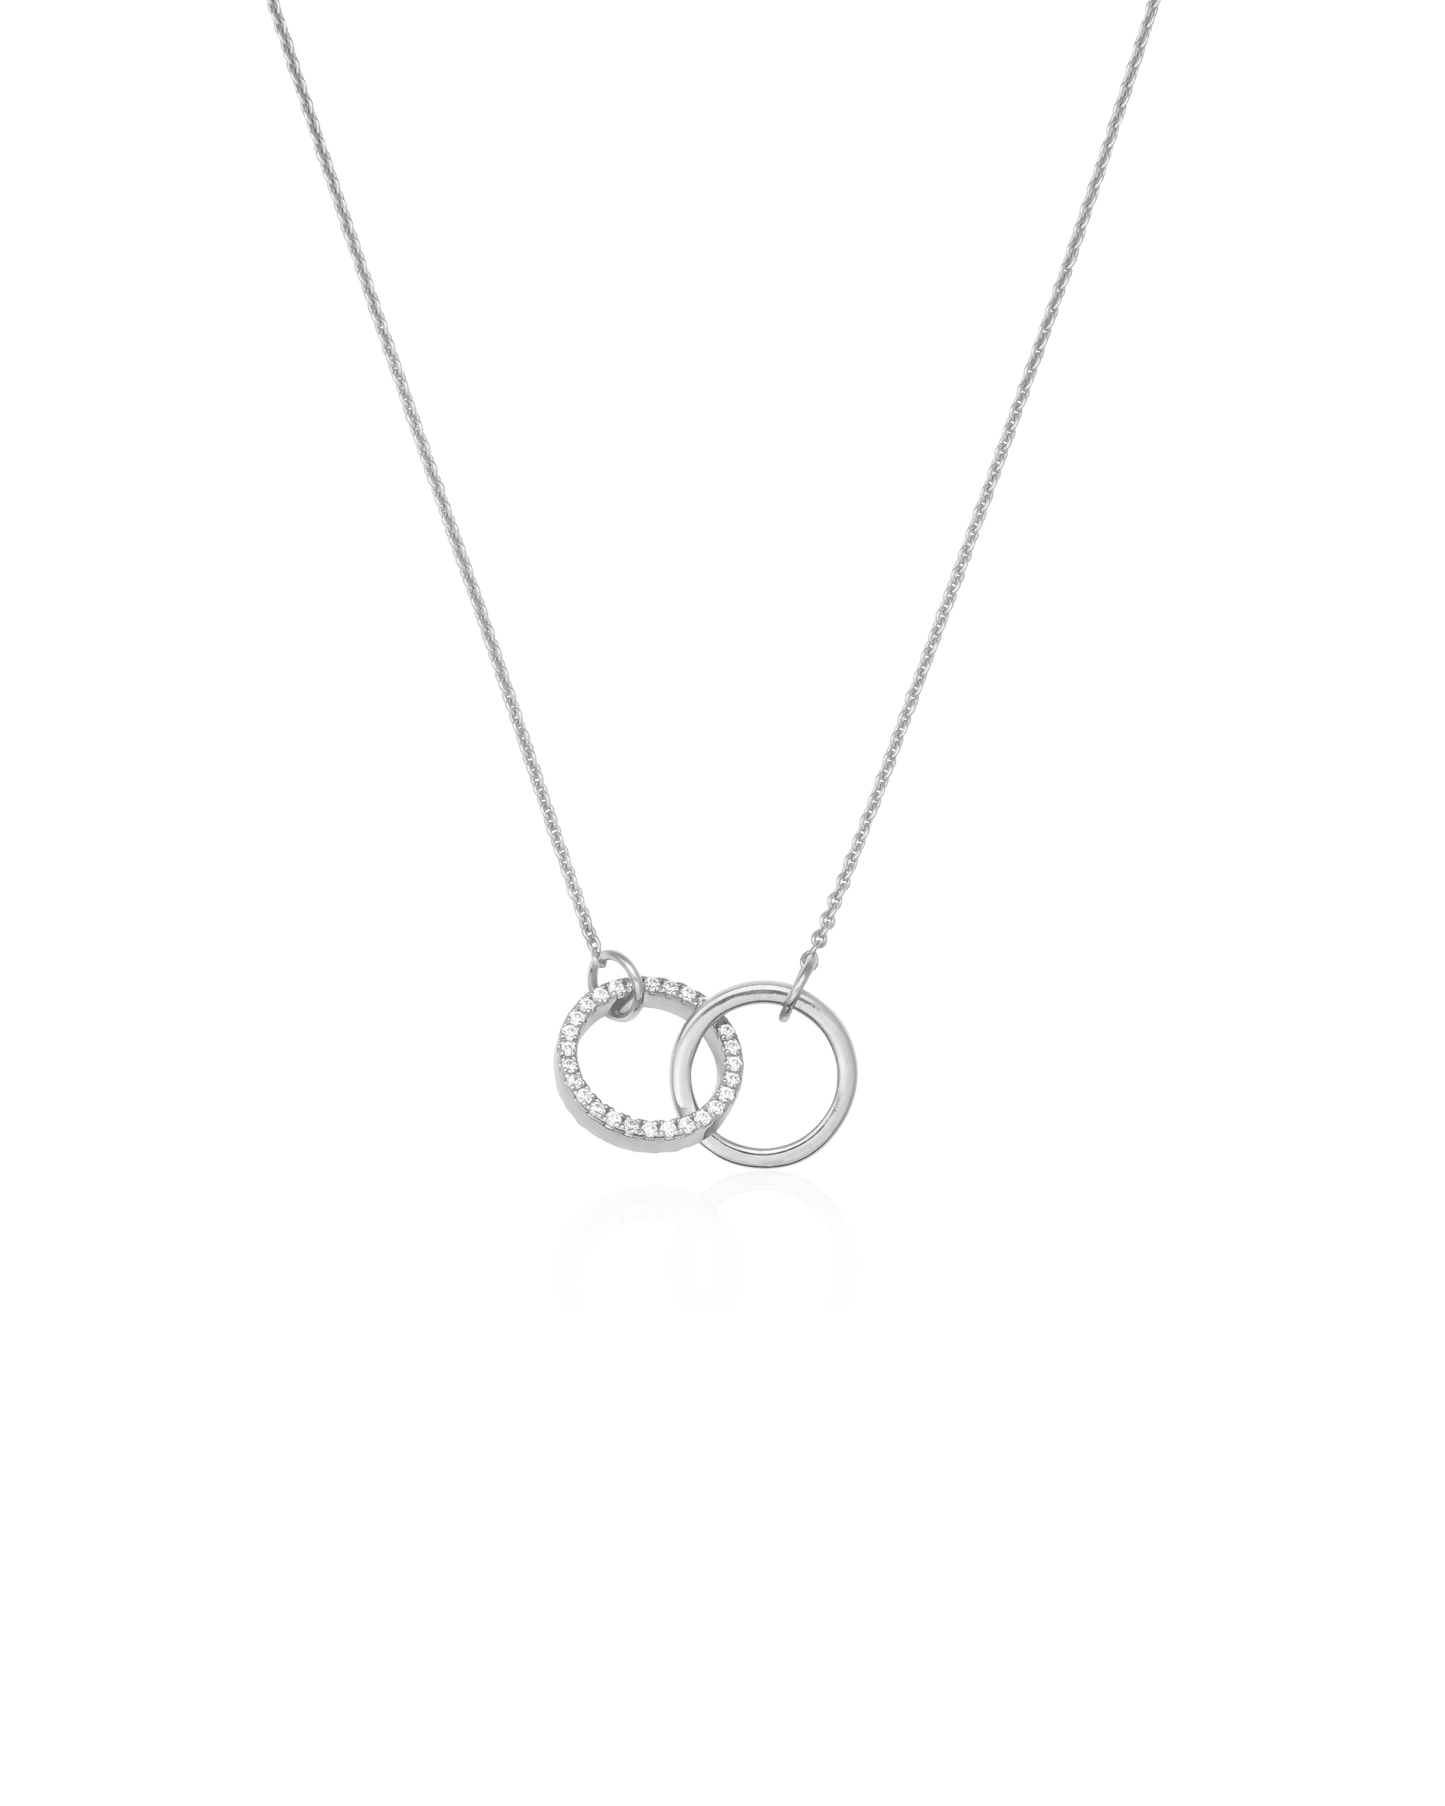 Interlocking Necklace - 925 Sterling Silver Necklaces magal-dev Small 14"- 16" 